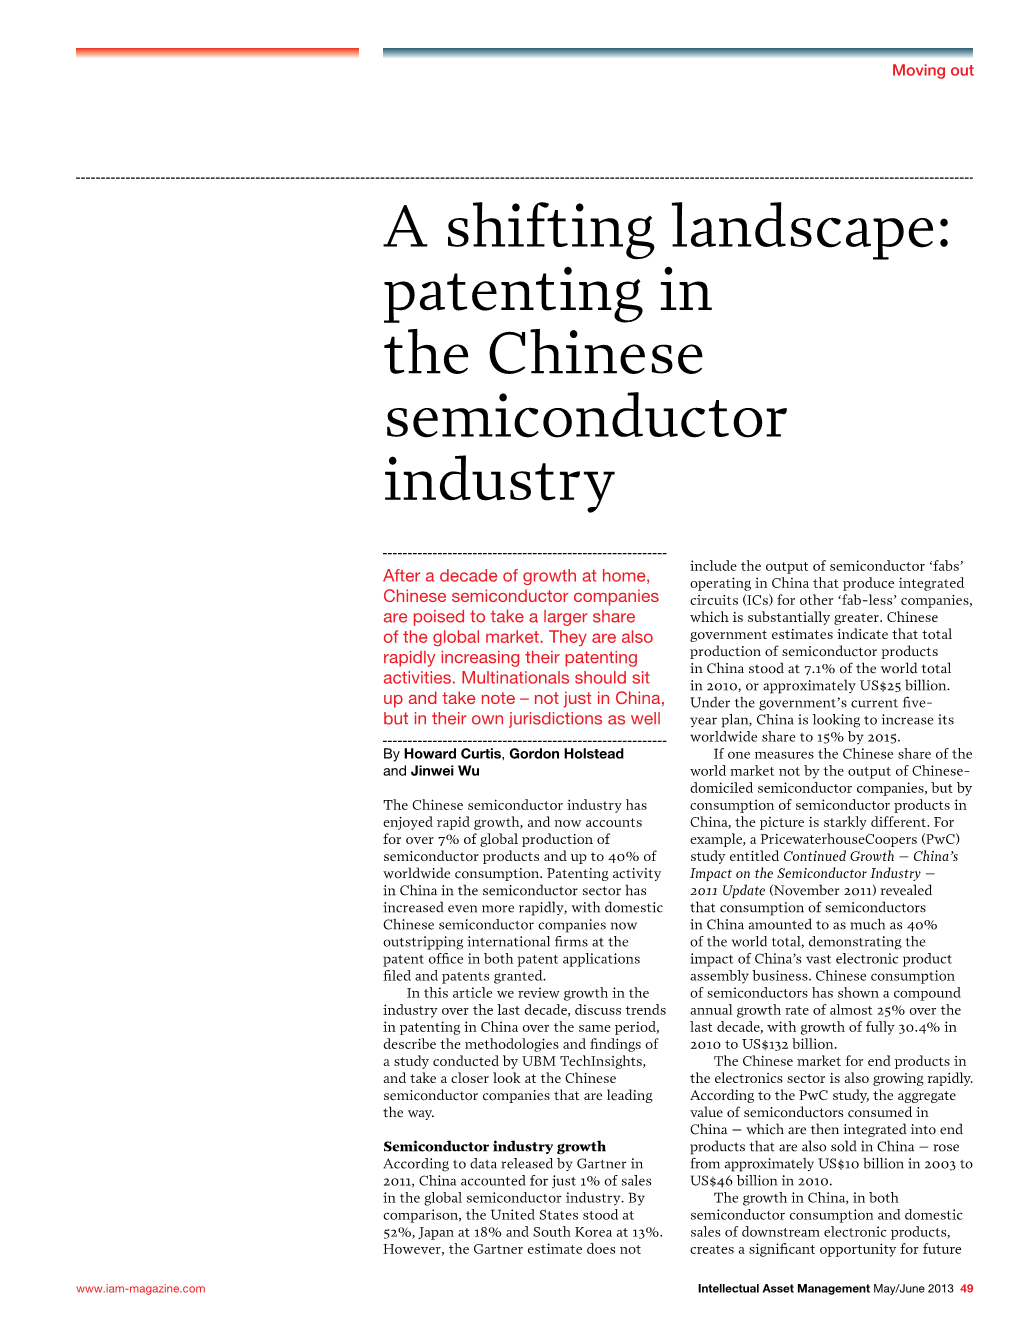 A Shifting Landscape: Patenting in the Chinese Semiconductor Industry